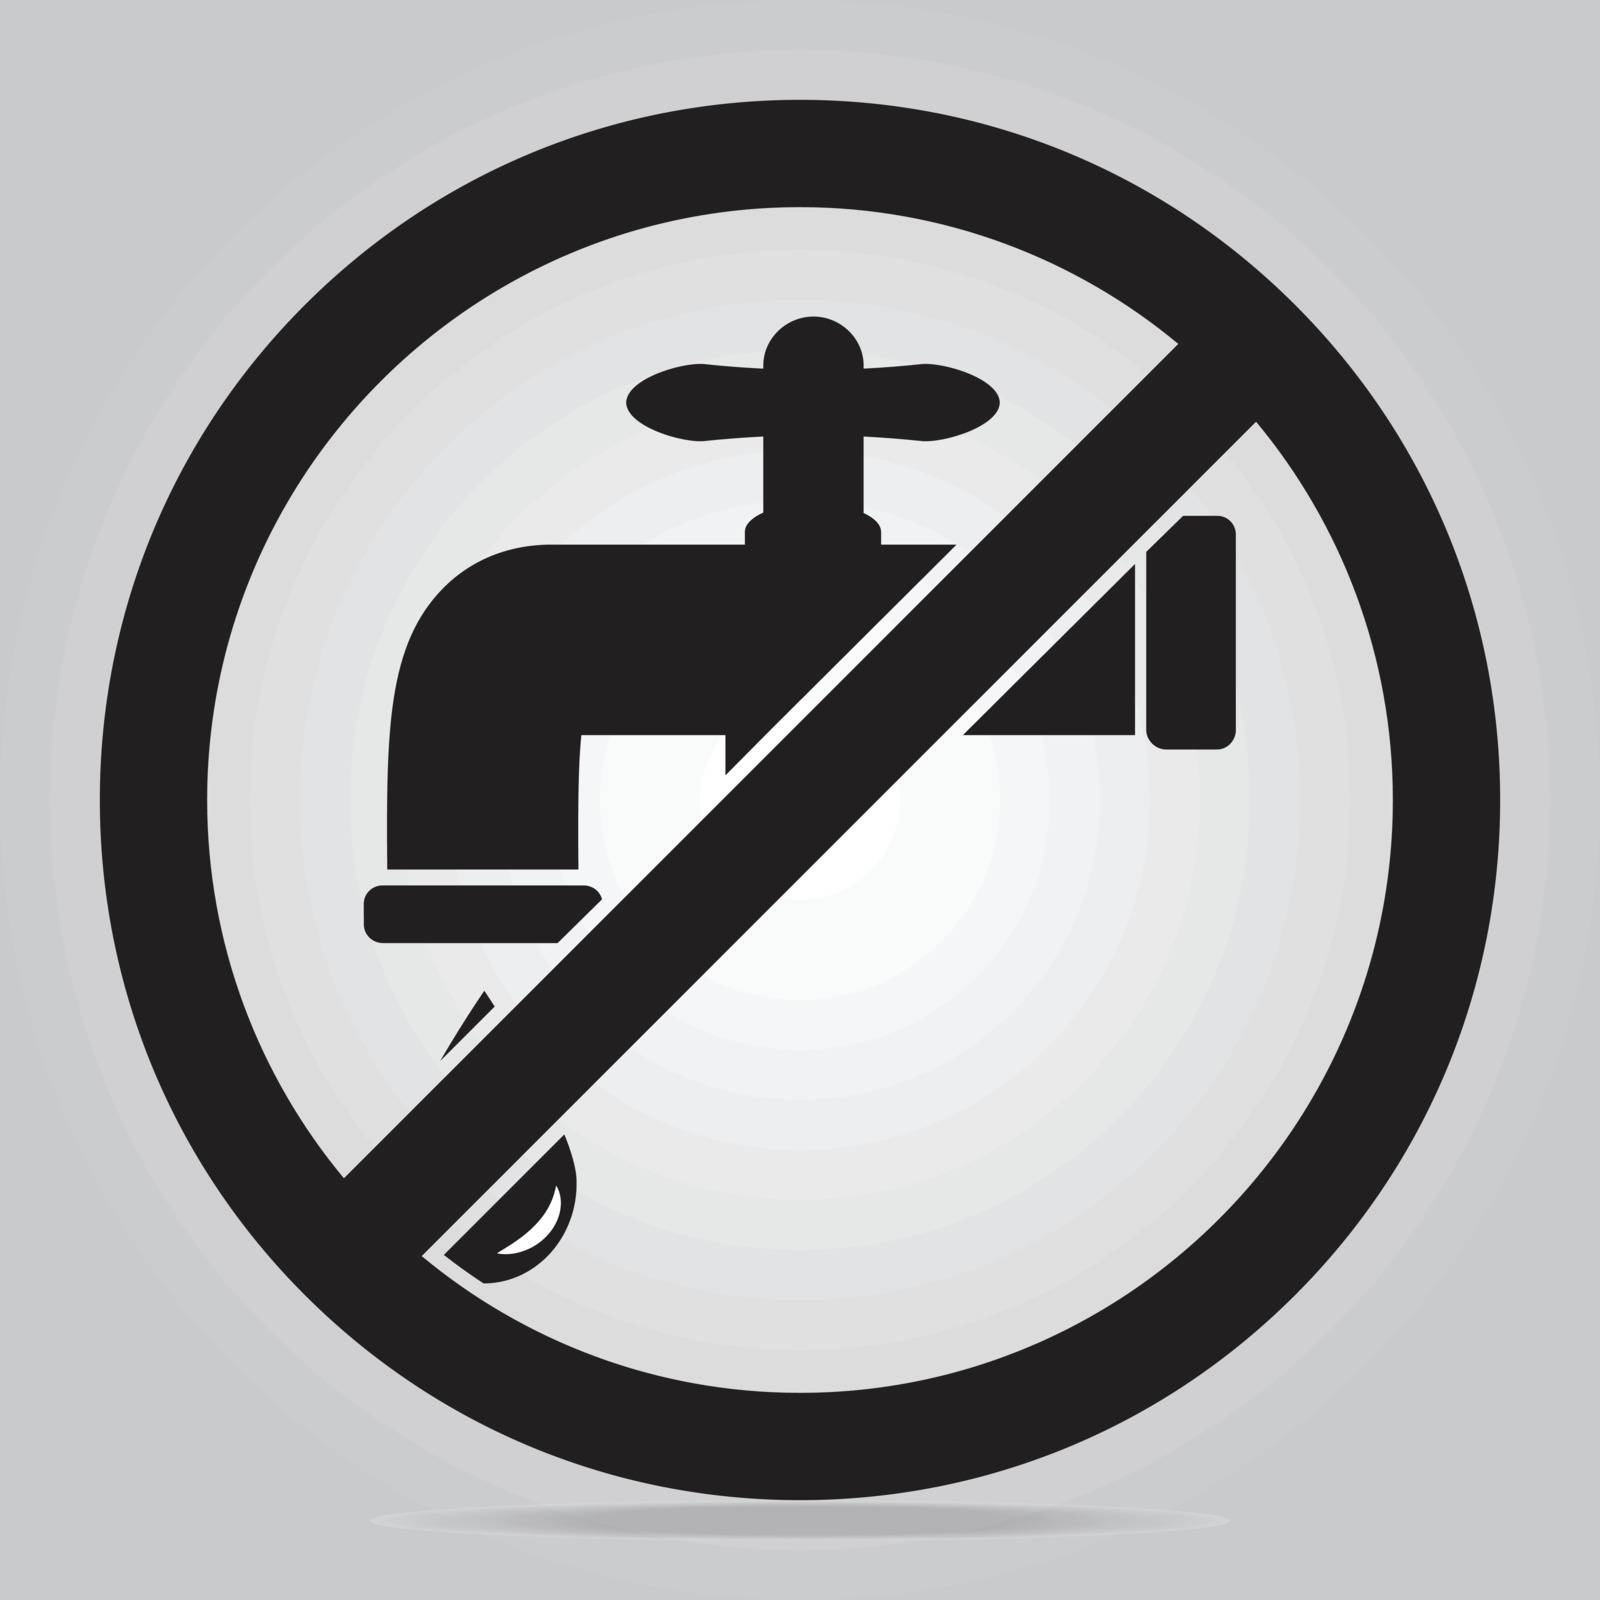 Save water sign vector illustration by Kheat